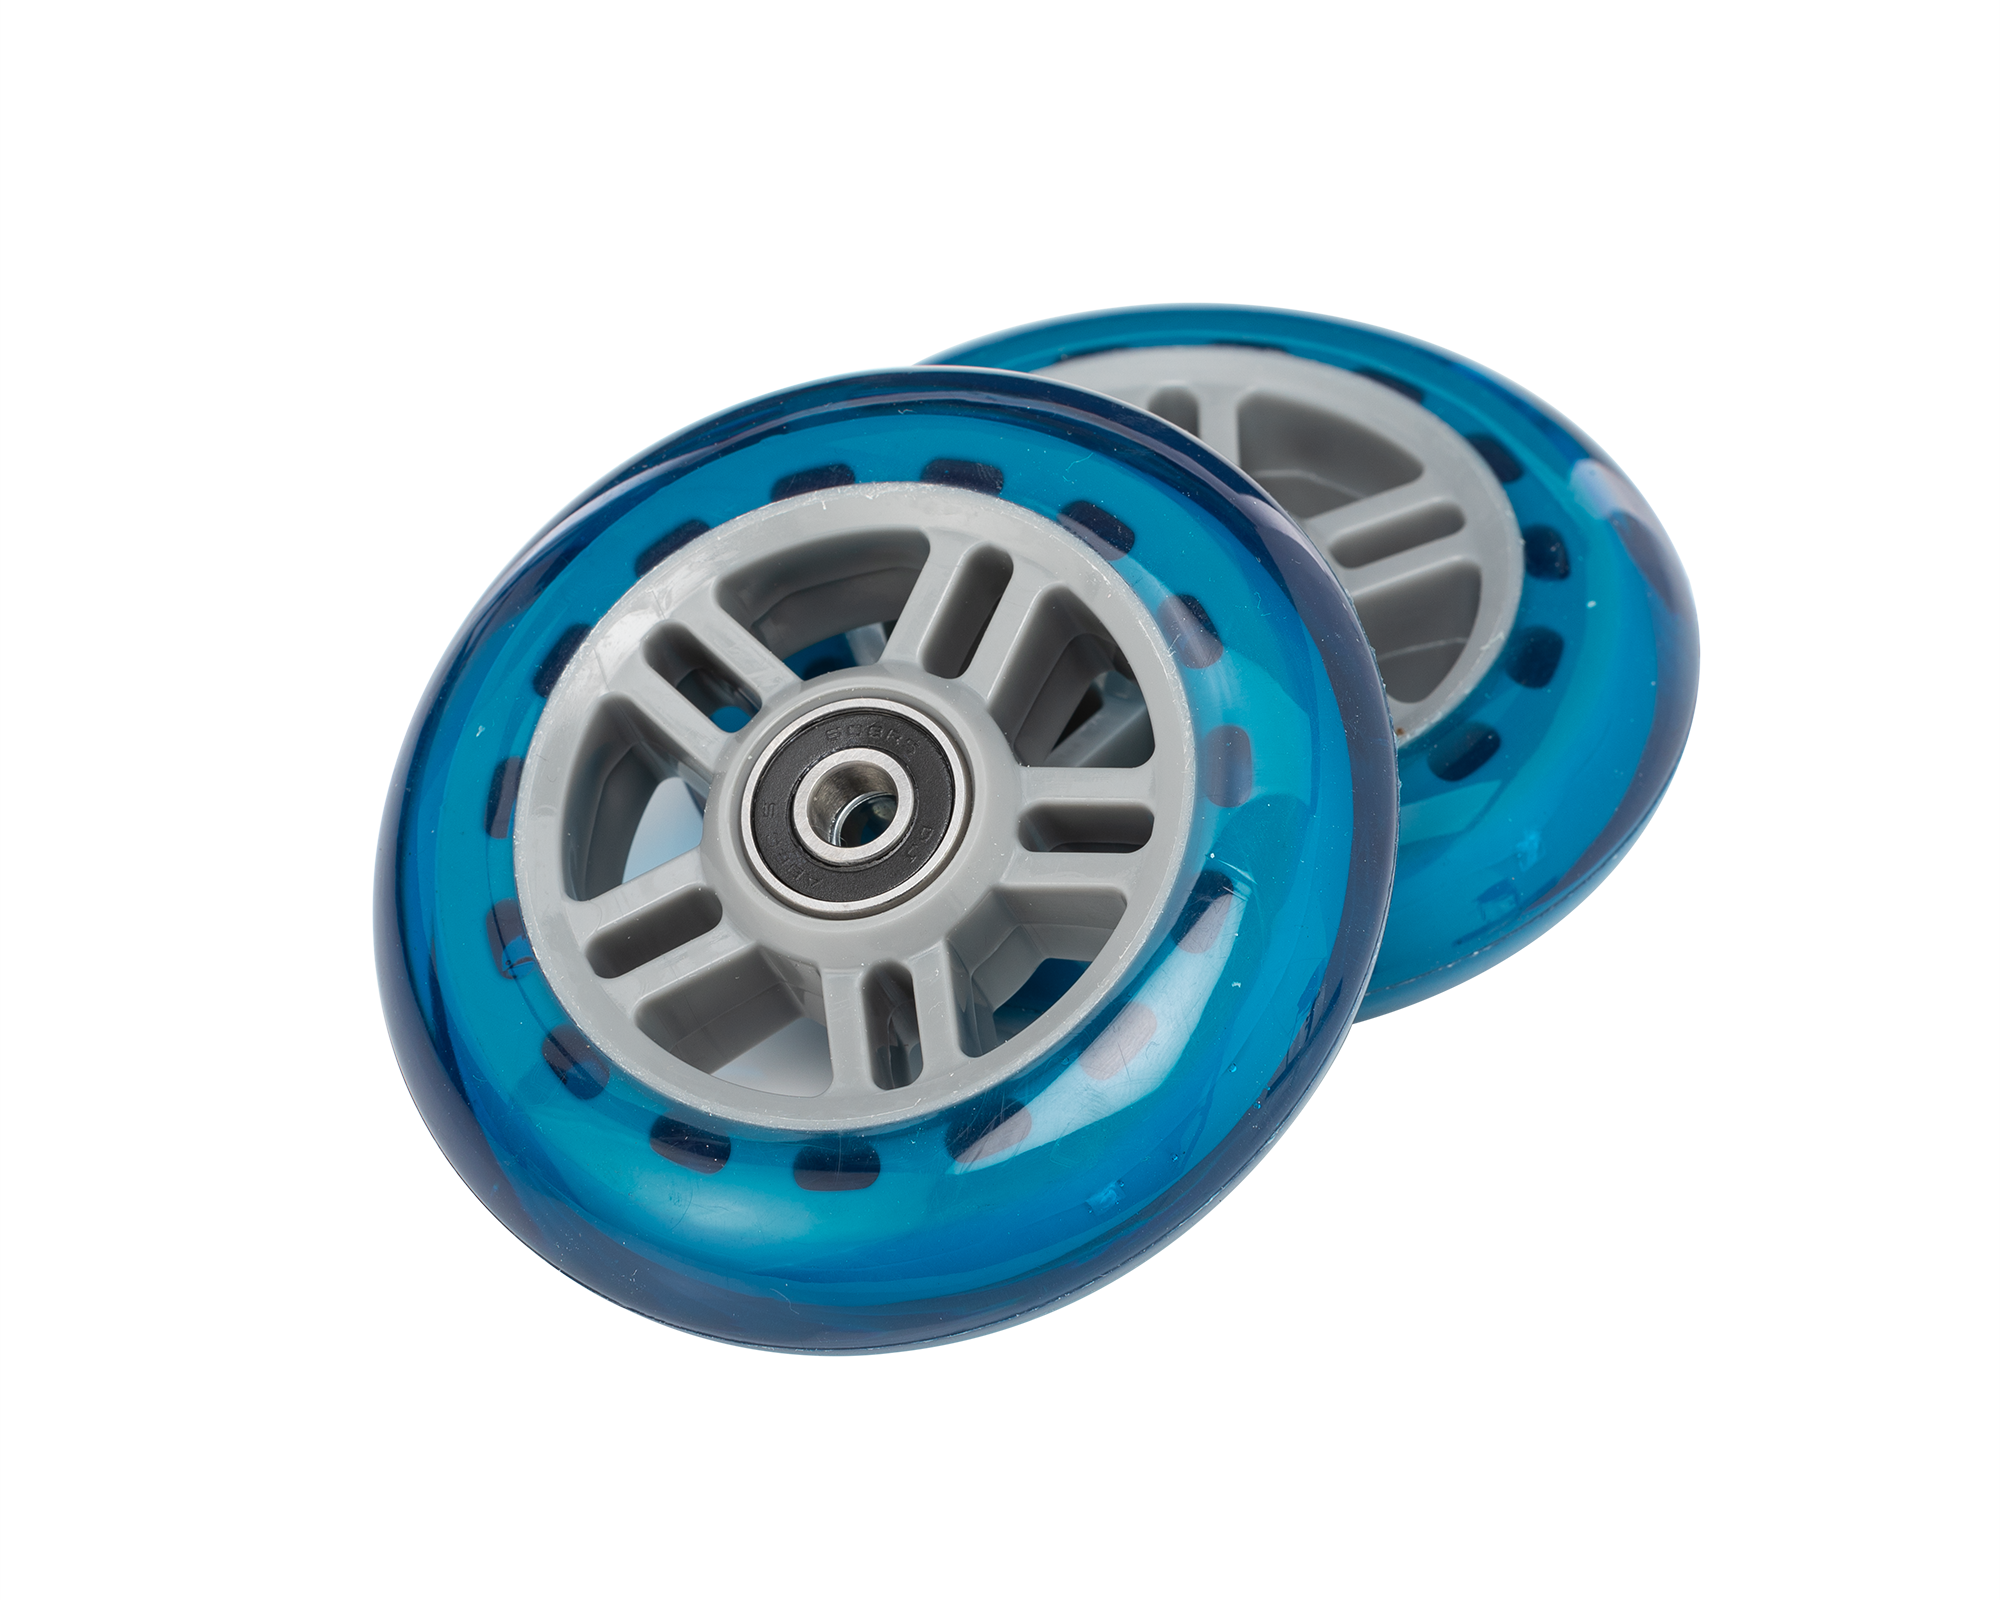 AOWISH 125mm Scooter Wheels 125mmX24mm Scooter Replacement Wheel w/Bearings  ABEC-9 for Razor A3 Kick Scooter, DeltaWing Scooter, Swing Wiggle Scooter